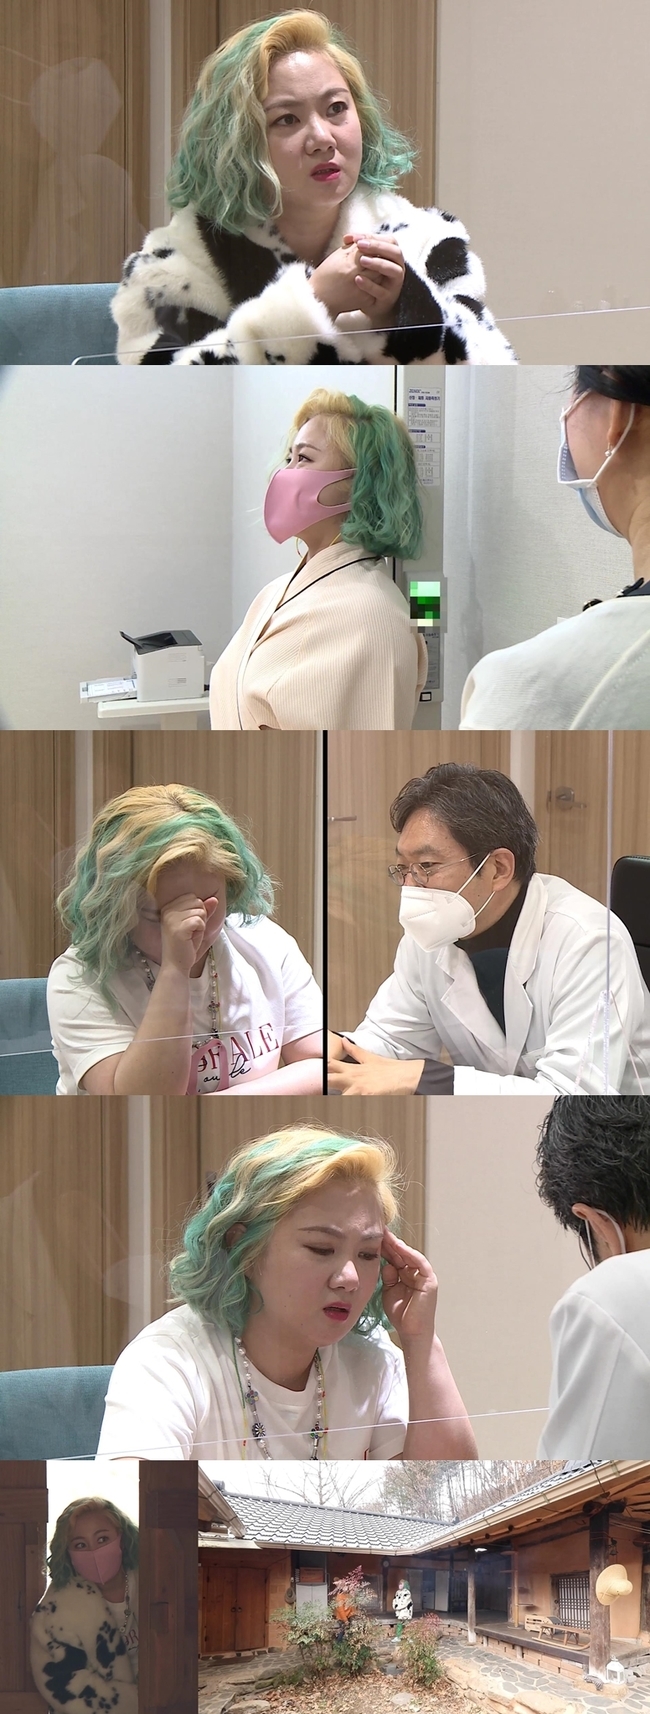 Park Na-raes health is revealed nakedly.Park Na-raes ten-stretched health checkup report will be released on MBC I Live Alone broadcast on February 19th.Park Na-rae, who visited a clinic to build a grandmothers medicine, is tested for body heat by the recommendation of a oriental medicine doctor.Park Na-rae, who has completed a meticulous questionnaire and has completed various tests, reacts to the question in front of a physical tester that measures height and weight.Park Na-rae, who threw off his brilliant fault (?), climbed on the physical examiner in a spleen posture and the measurement begins.Park Na-rae, who confirmed the measurement result, urgently asked for a re-examination and said to the incredible re-examination result, Why did you have such a result?After seeing the test results, Park Na-raes expression, which has changed seriously, is caught and raises curiosity.The oriental medicine doctor who checked the questionnaire asked, Is not there a lot of appetite? Park Na-rae said, I reduced my appetite because of diet.Park Na-rae has done creepy Confessions to a oriental medicine doctor who tells me how to diet healthy.Embarrassed by serious Confessions, the oriental medicine doctor suggested another way, and Park Na-rae suddenly asked a thoughtful question and said that it made the atmosphere hot.Finally, I face the naked body heat test result and I am in a big shock, so I focus attention on what the result was.